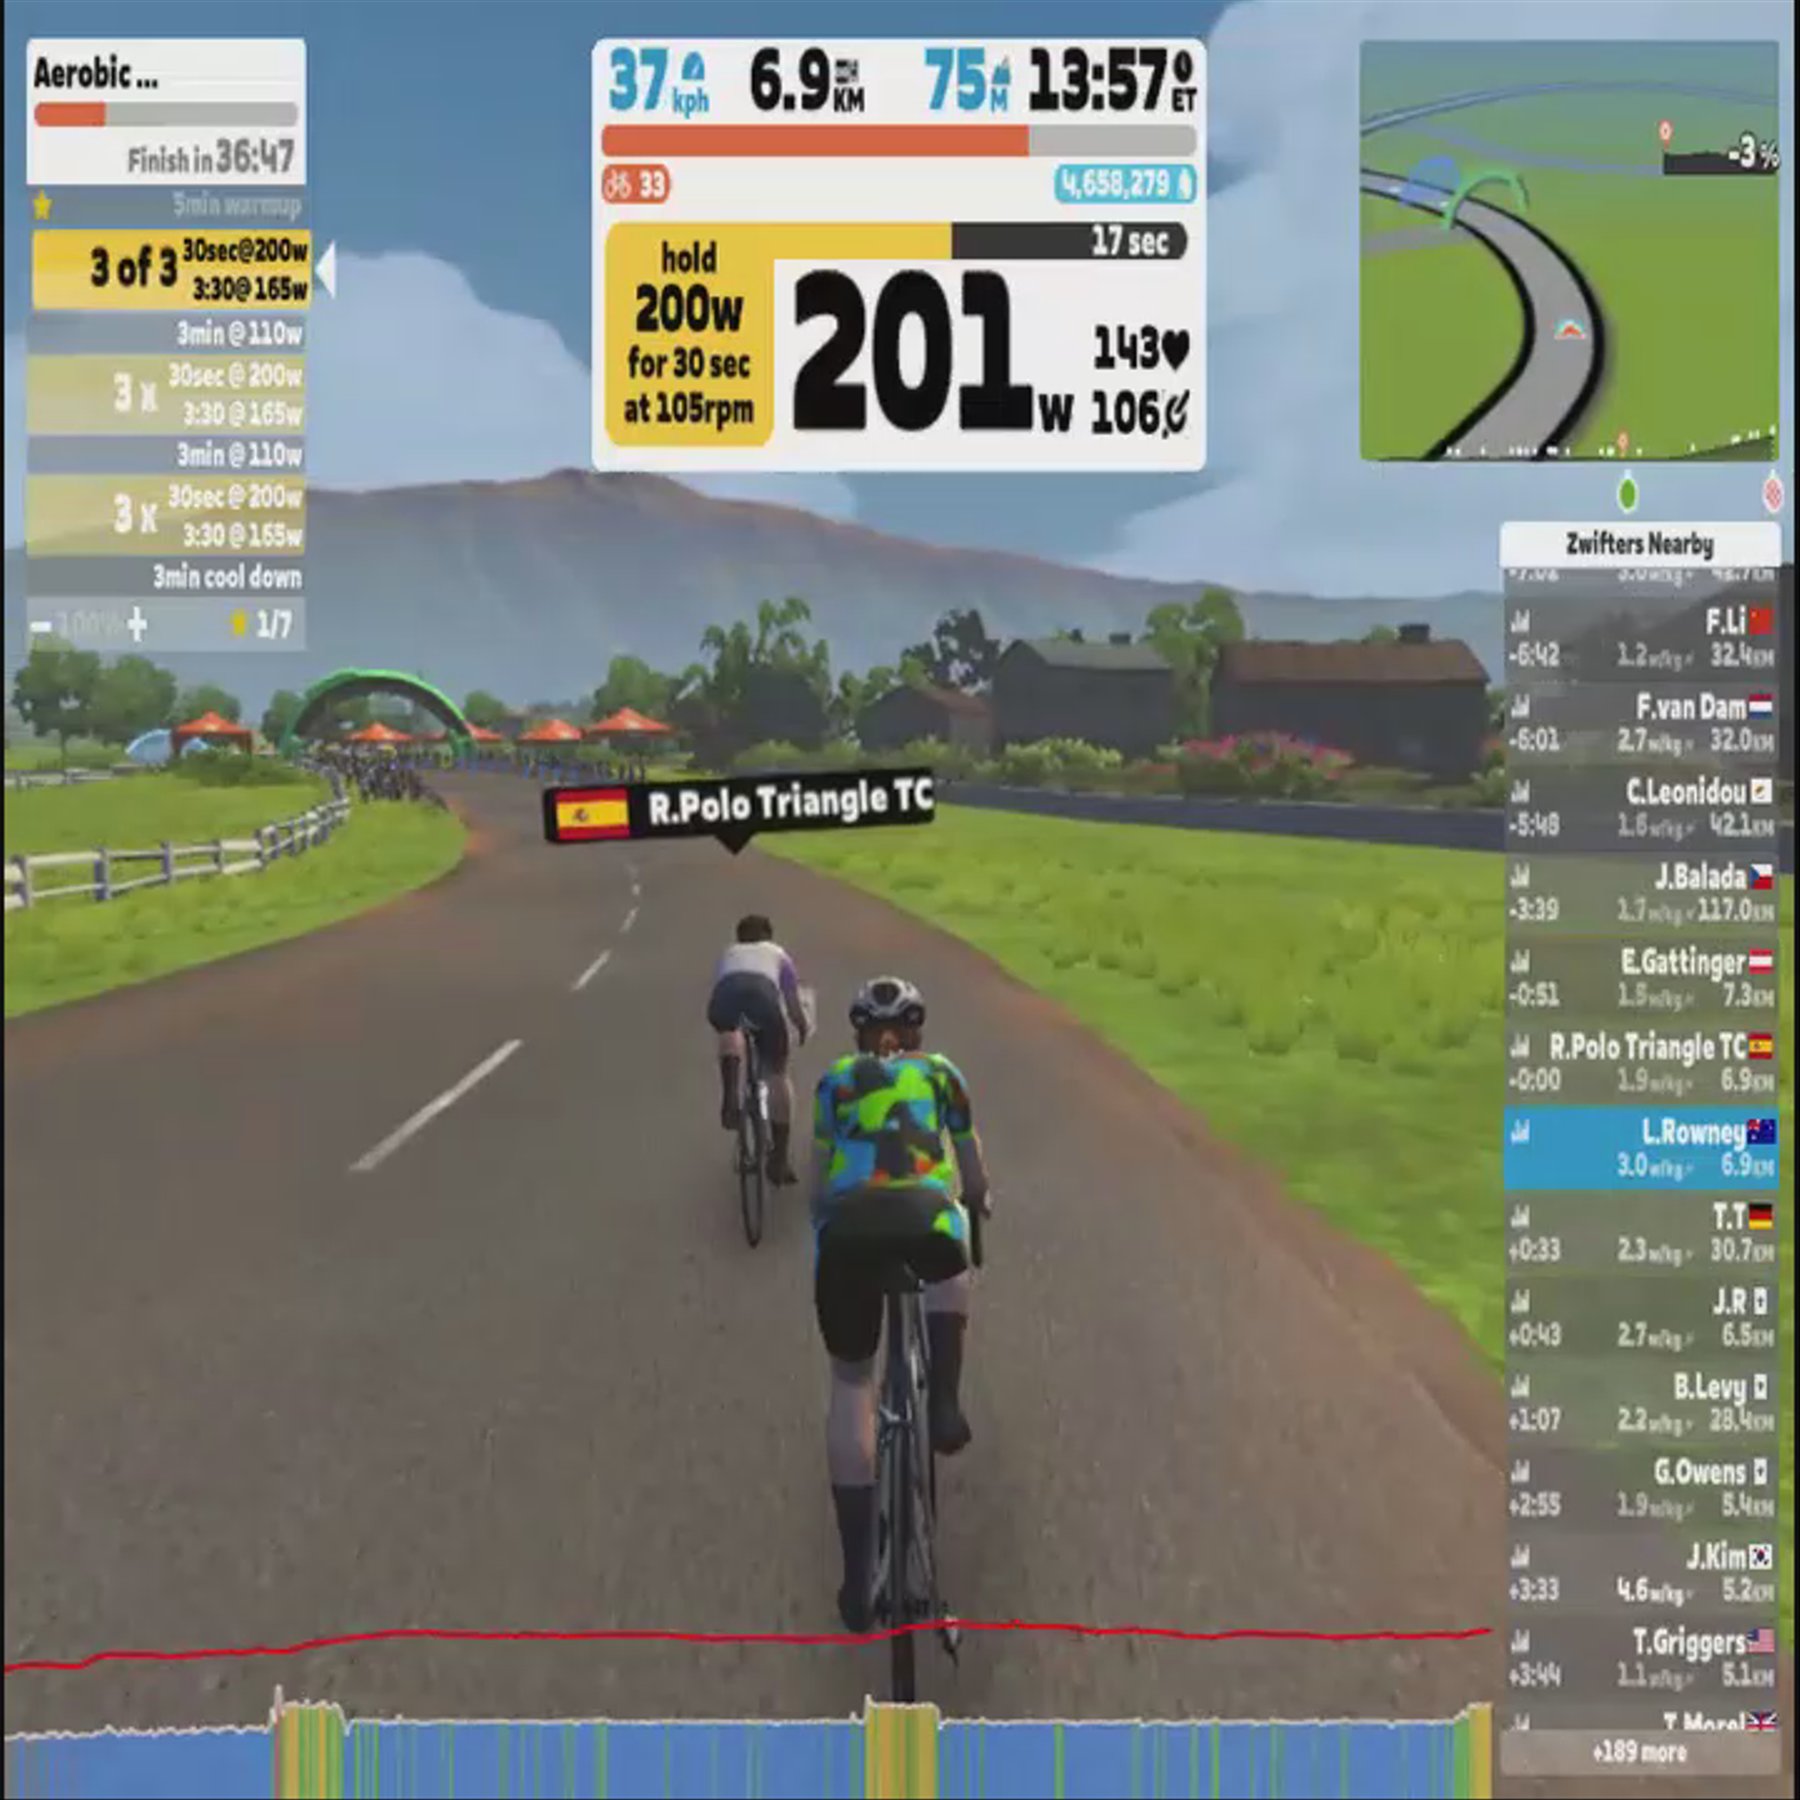 Zwift - Aerobic Sustainability in France